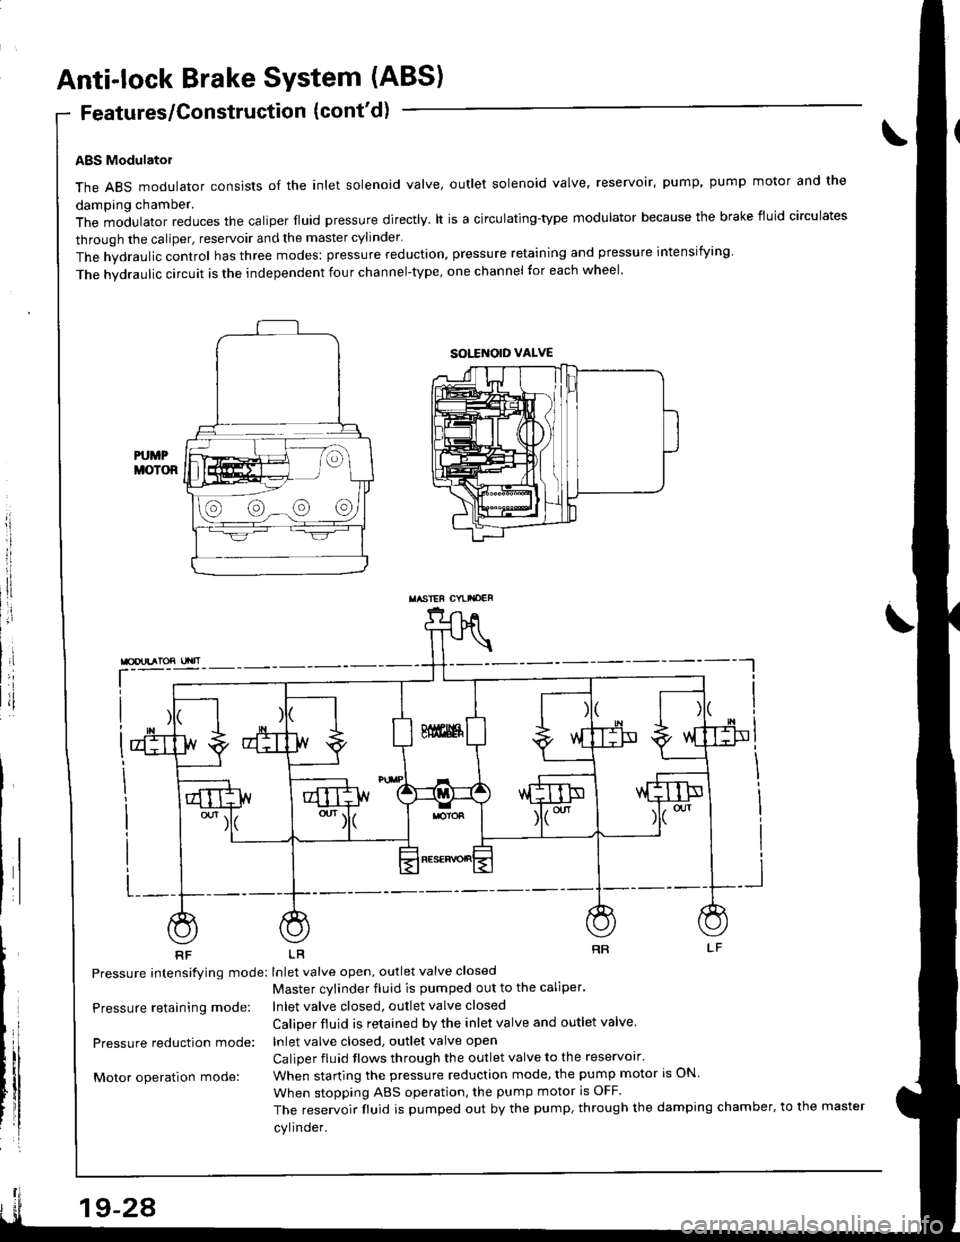 HONDA INTEGRA 1998 4.G User Guide Anti-lock Brake System (ABS)
Features/Construction (contd)
ABS Modulatol
The ABS modulator consists of the inlet solenoid valve, outlet solenoid valve, reservoir, pump, pump motor and the
damping cha